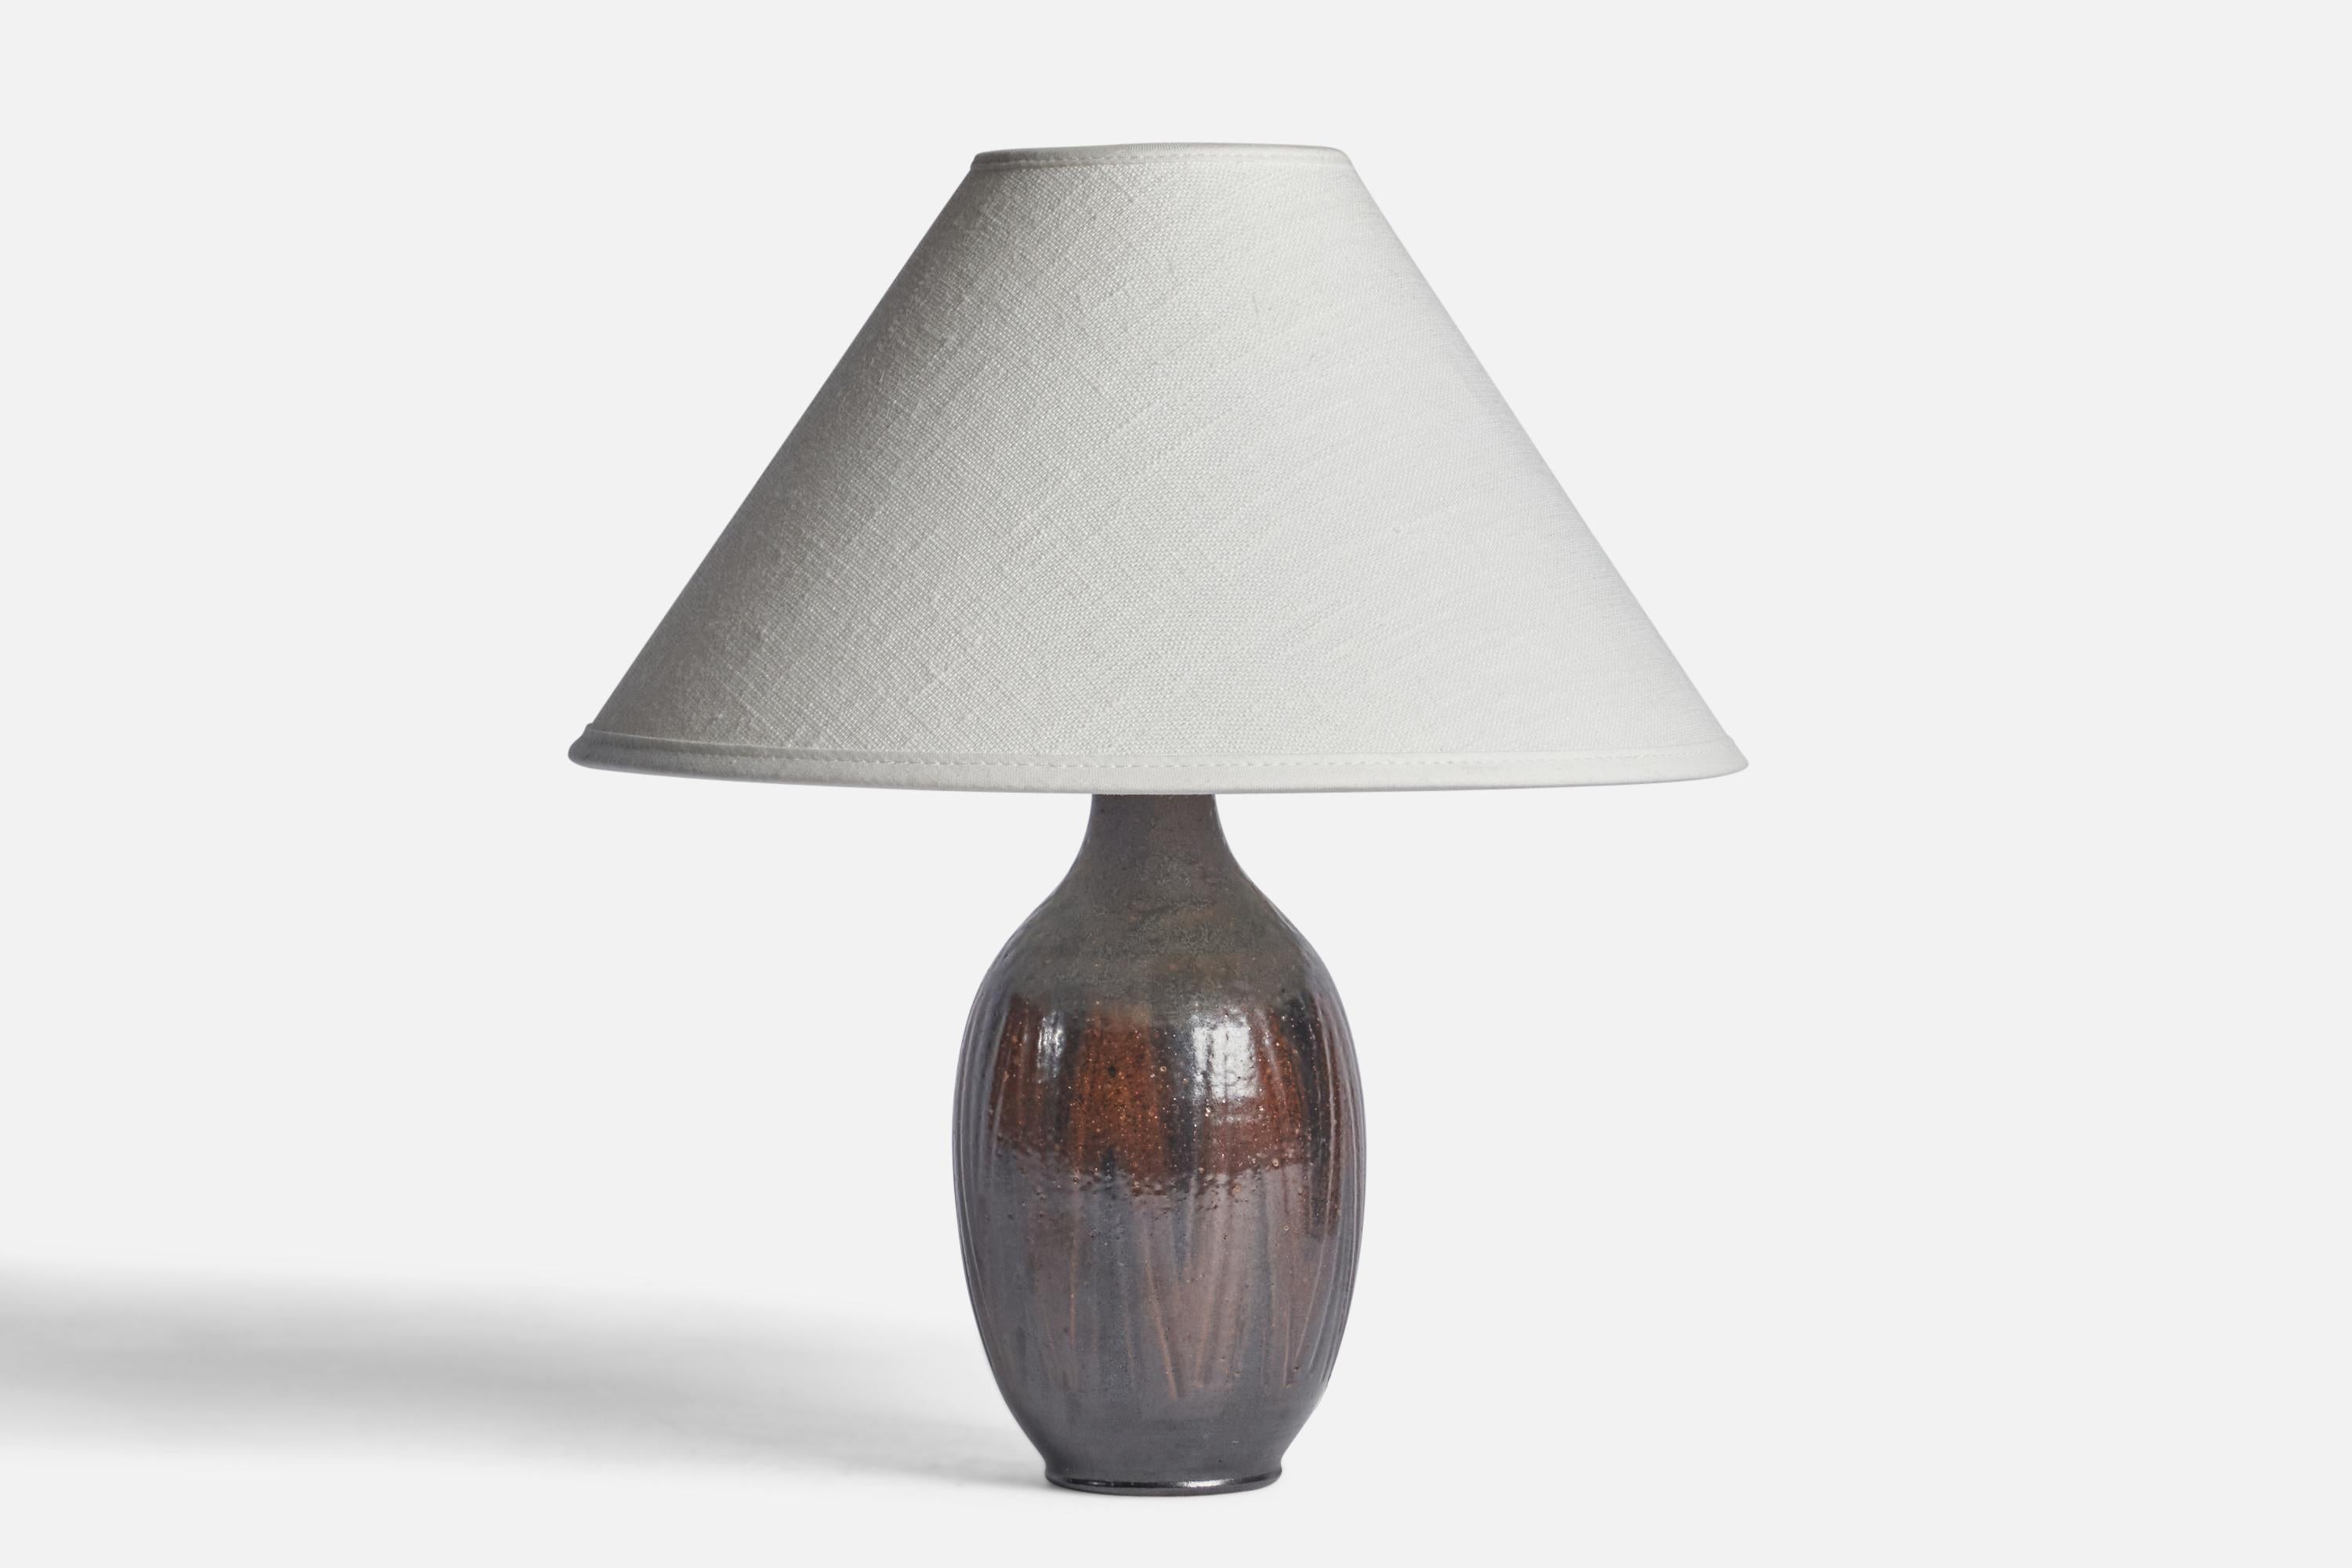 A brown and black-glazed table lamp designed and produced by Wallåkra, Sweden, c. 1960s.

Dimensions of Lamp (inches): 8.25” H x 3.5” Diameter
Dimensions of Shade (inches): 2.5” Top Diameter x 10” Bottom Diameter x 5.5